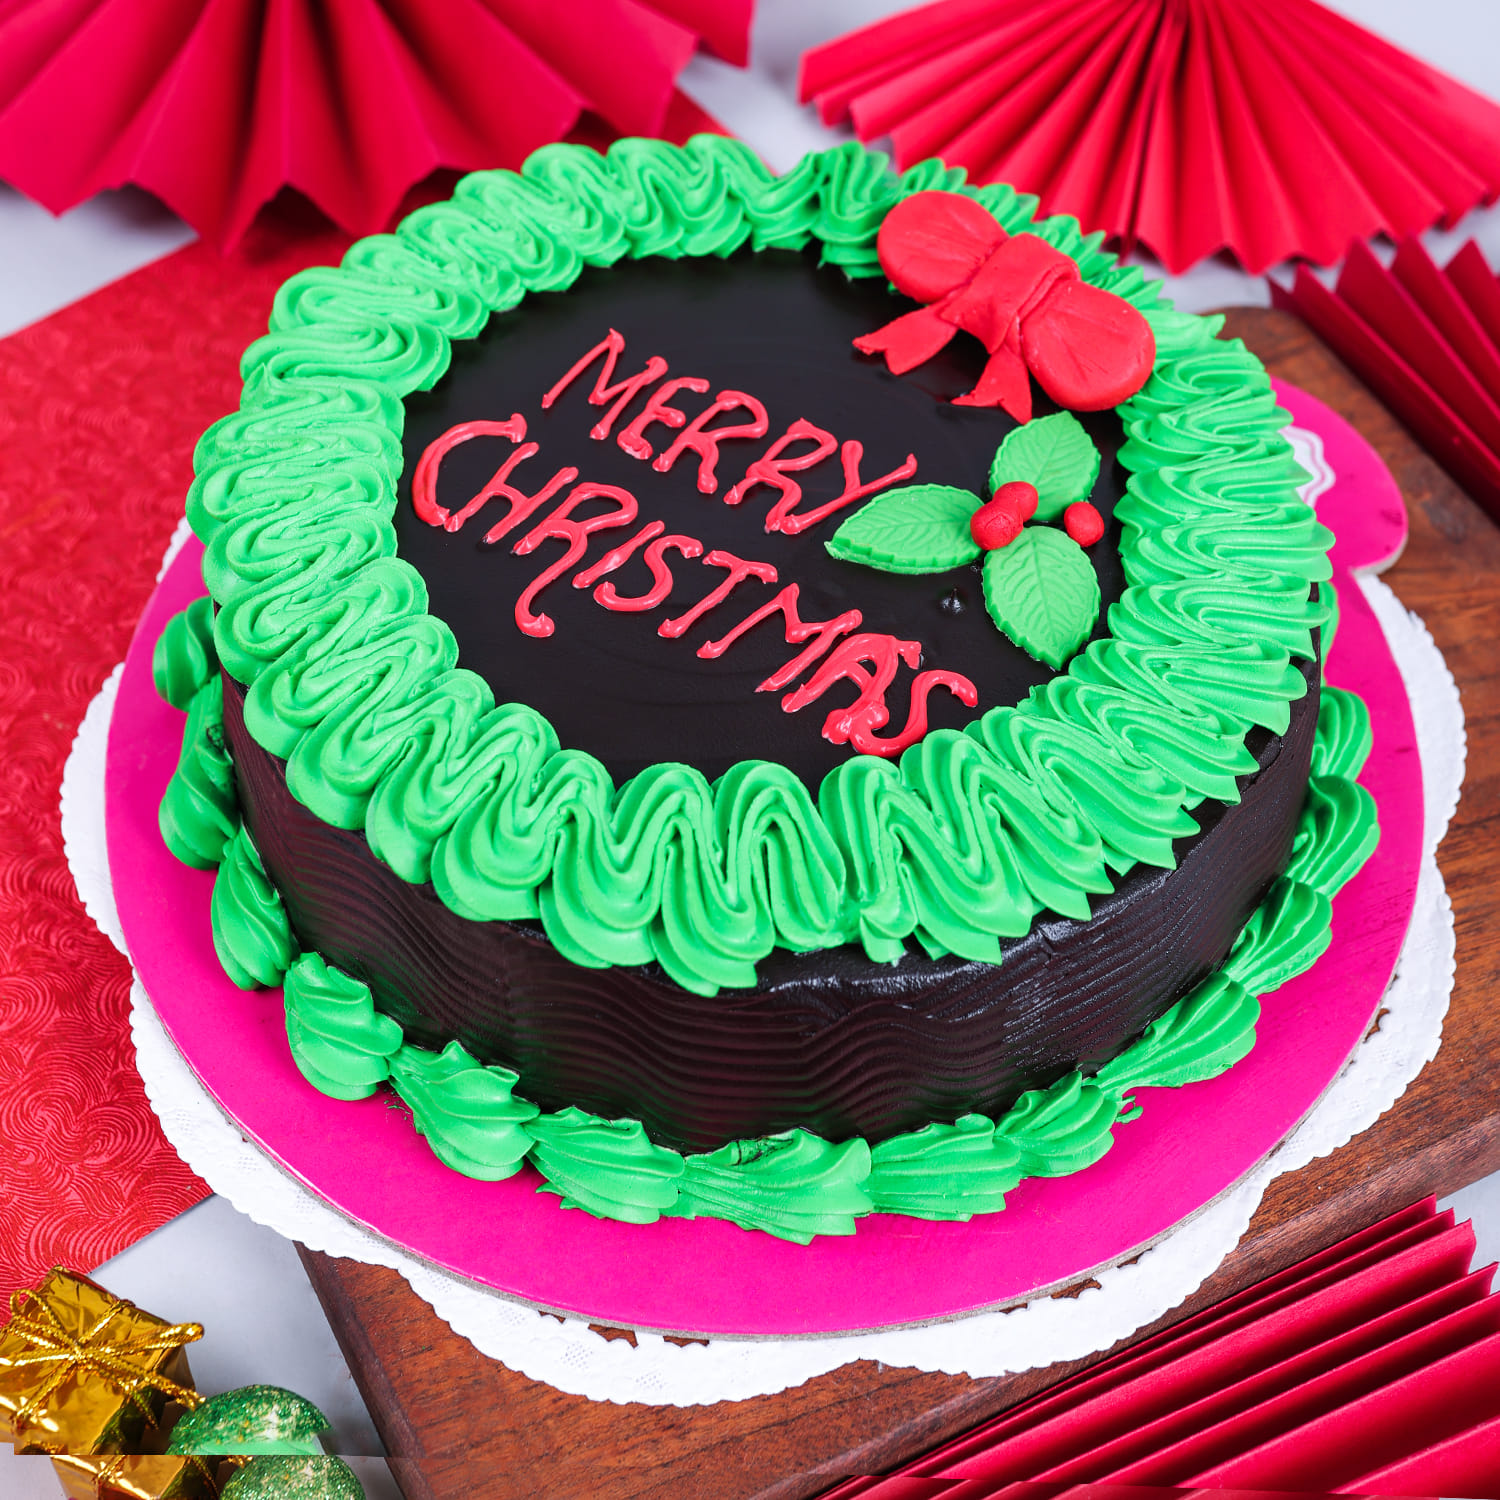 Try out these cake flavours for a sweet Christmas celebration -